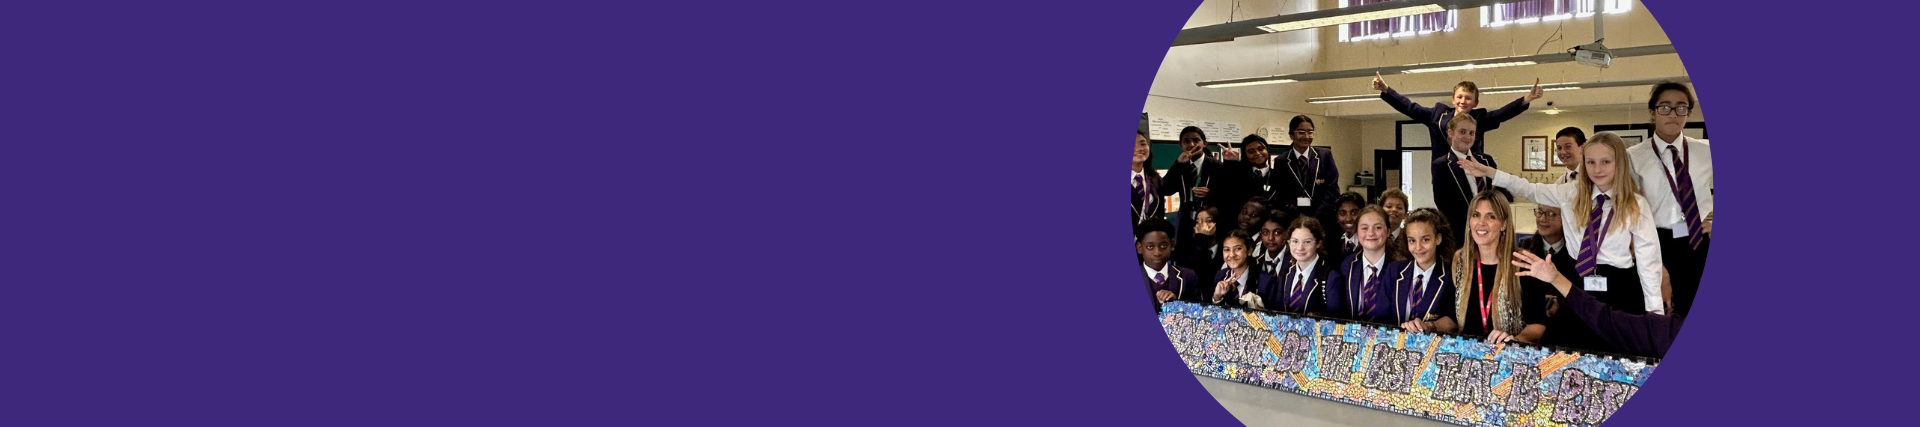 Purple banner with an image on the right of a group of children and teacher with a mosaic design in front of them